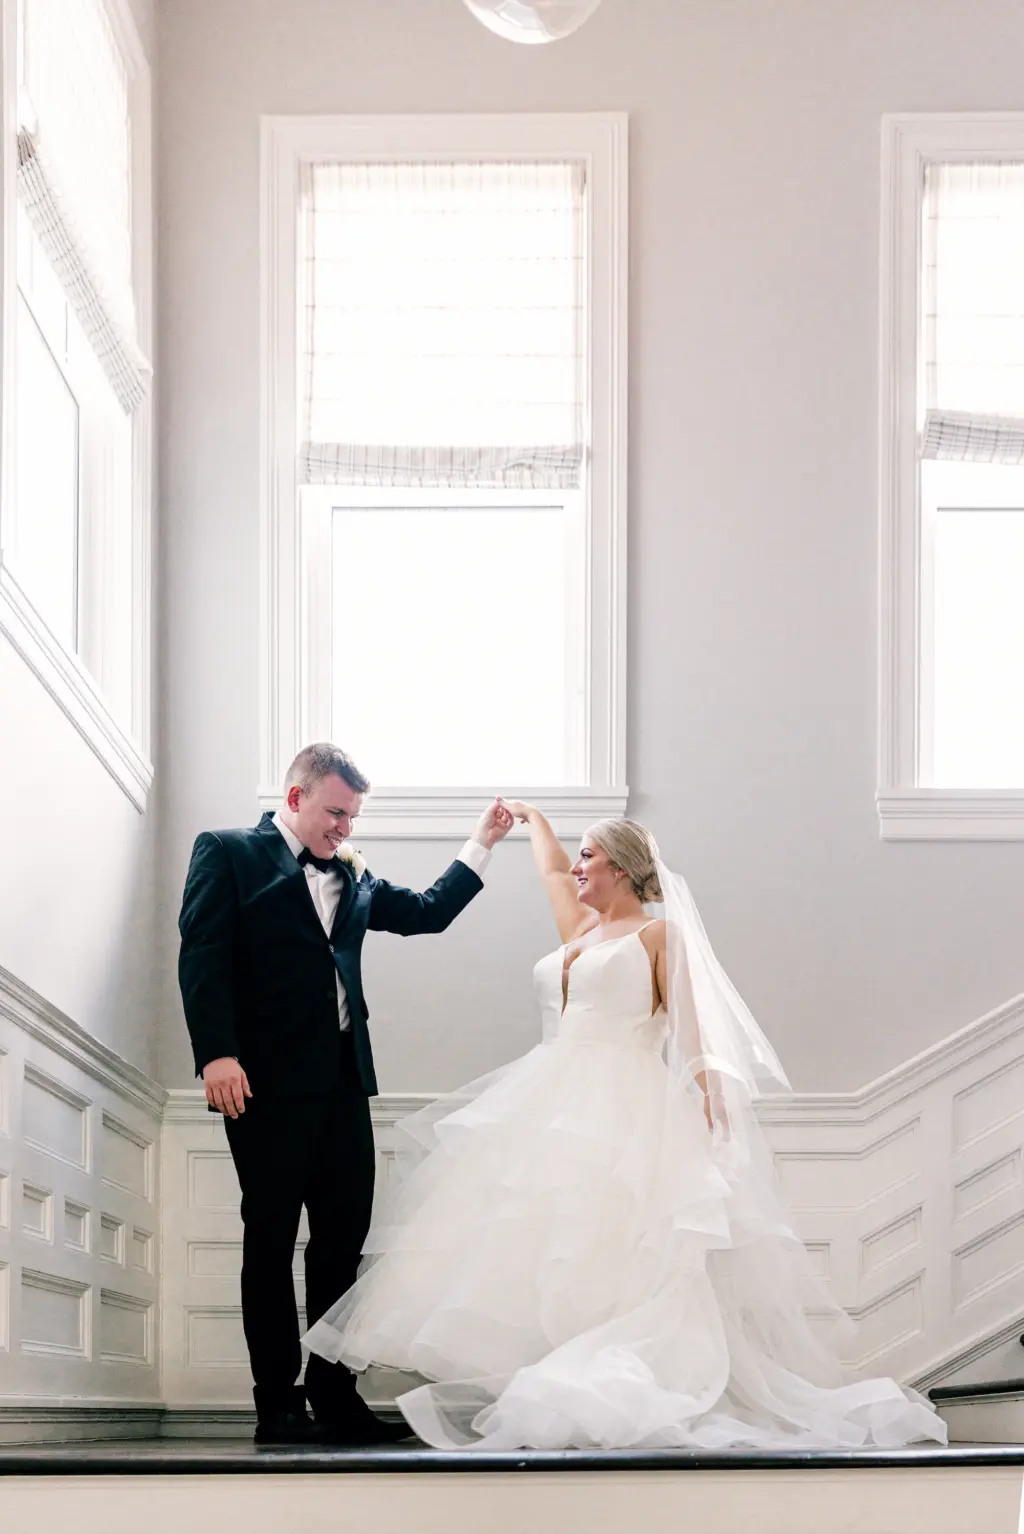 Bride and Groom Dancing on the Stairs Wedding Portrait